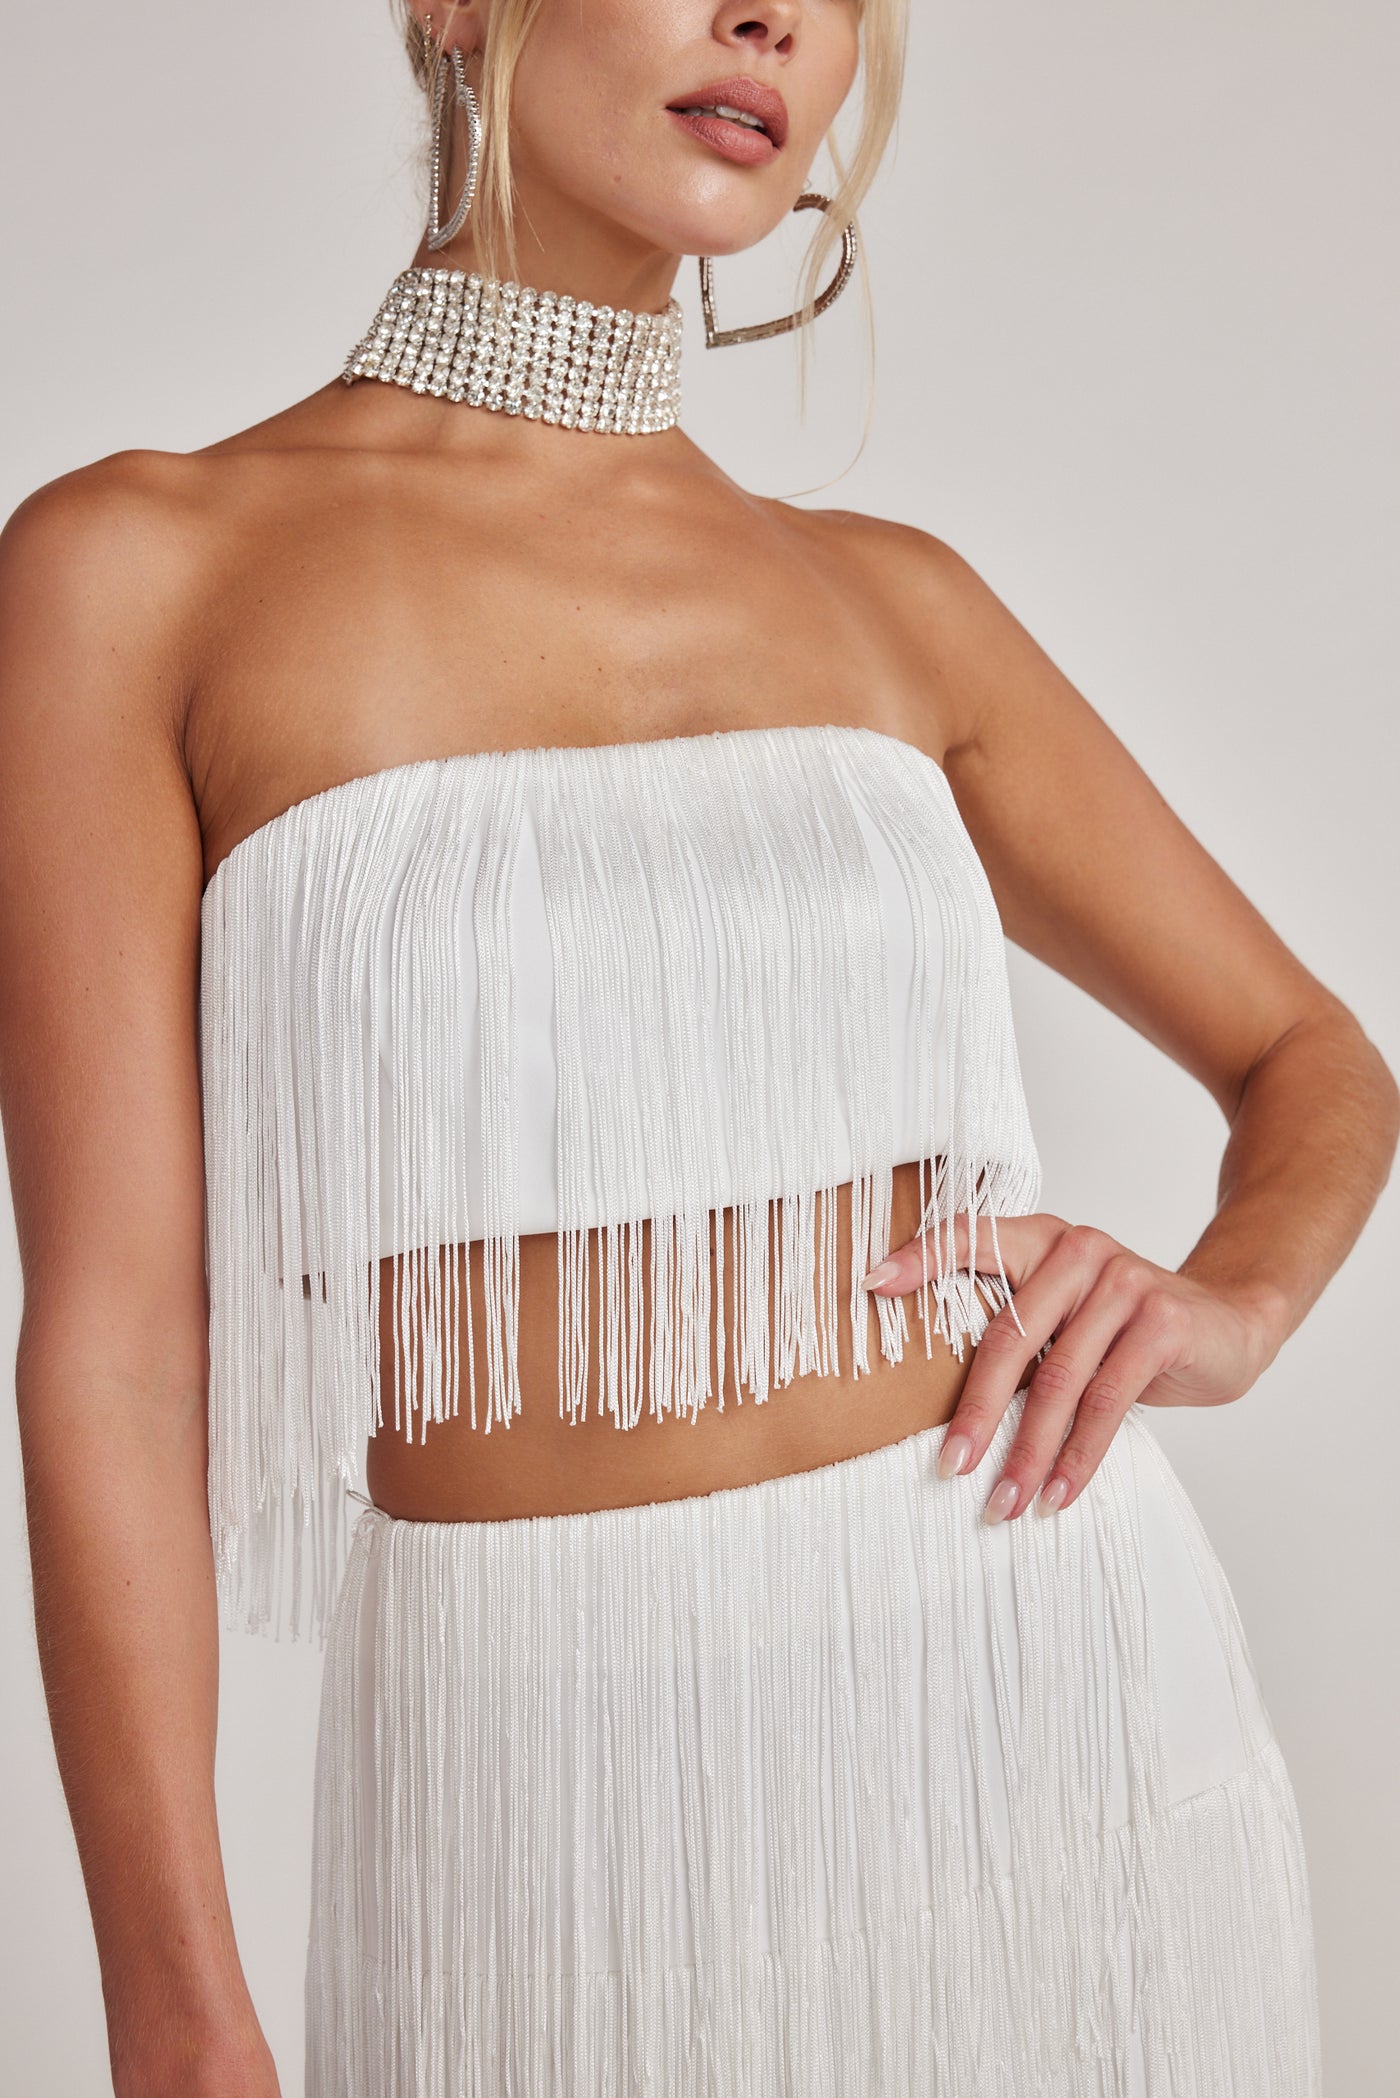 Gatsby White Fringe Strapless Top - L Size - Women's Tops - 12th Tribe